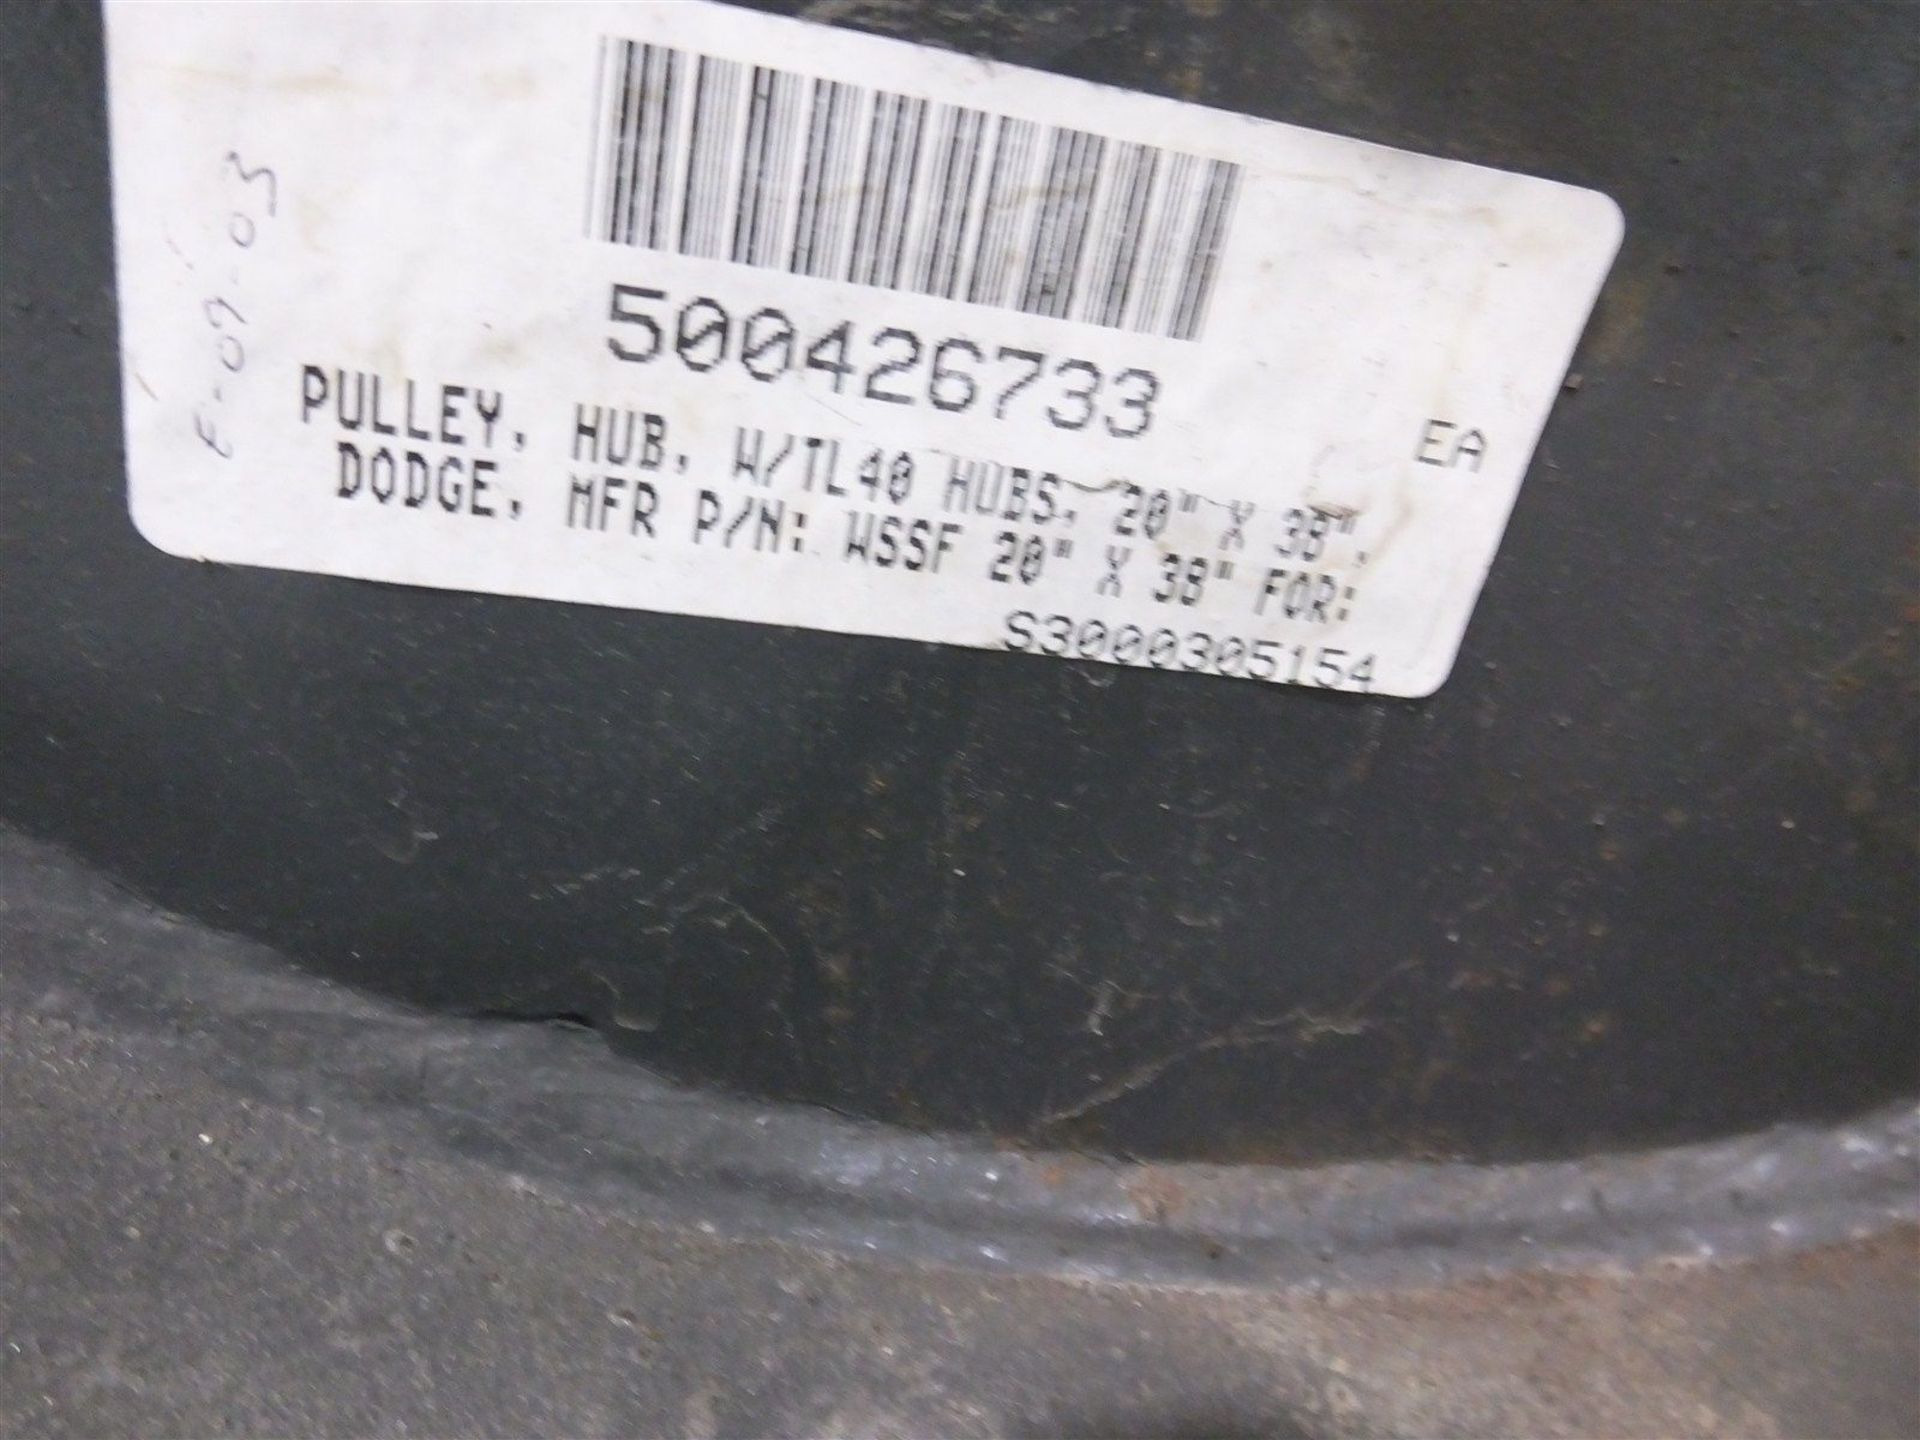 Dodge Pulley WSSF 20 in X 38 in Hub W/TL40 (Rigging Fee - $95) - Image 3 of 5